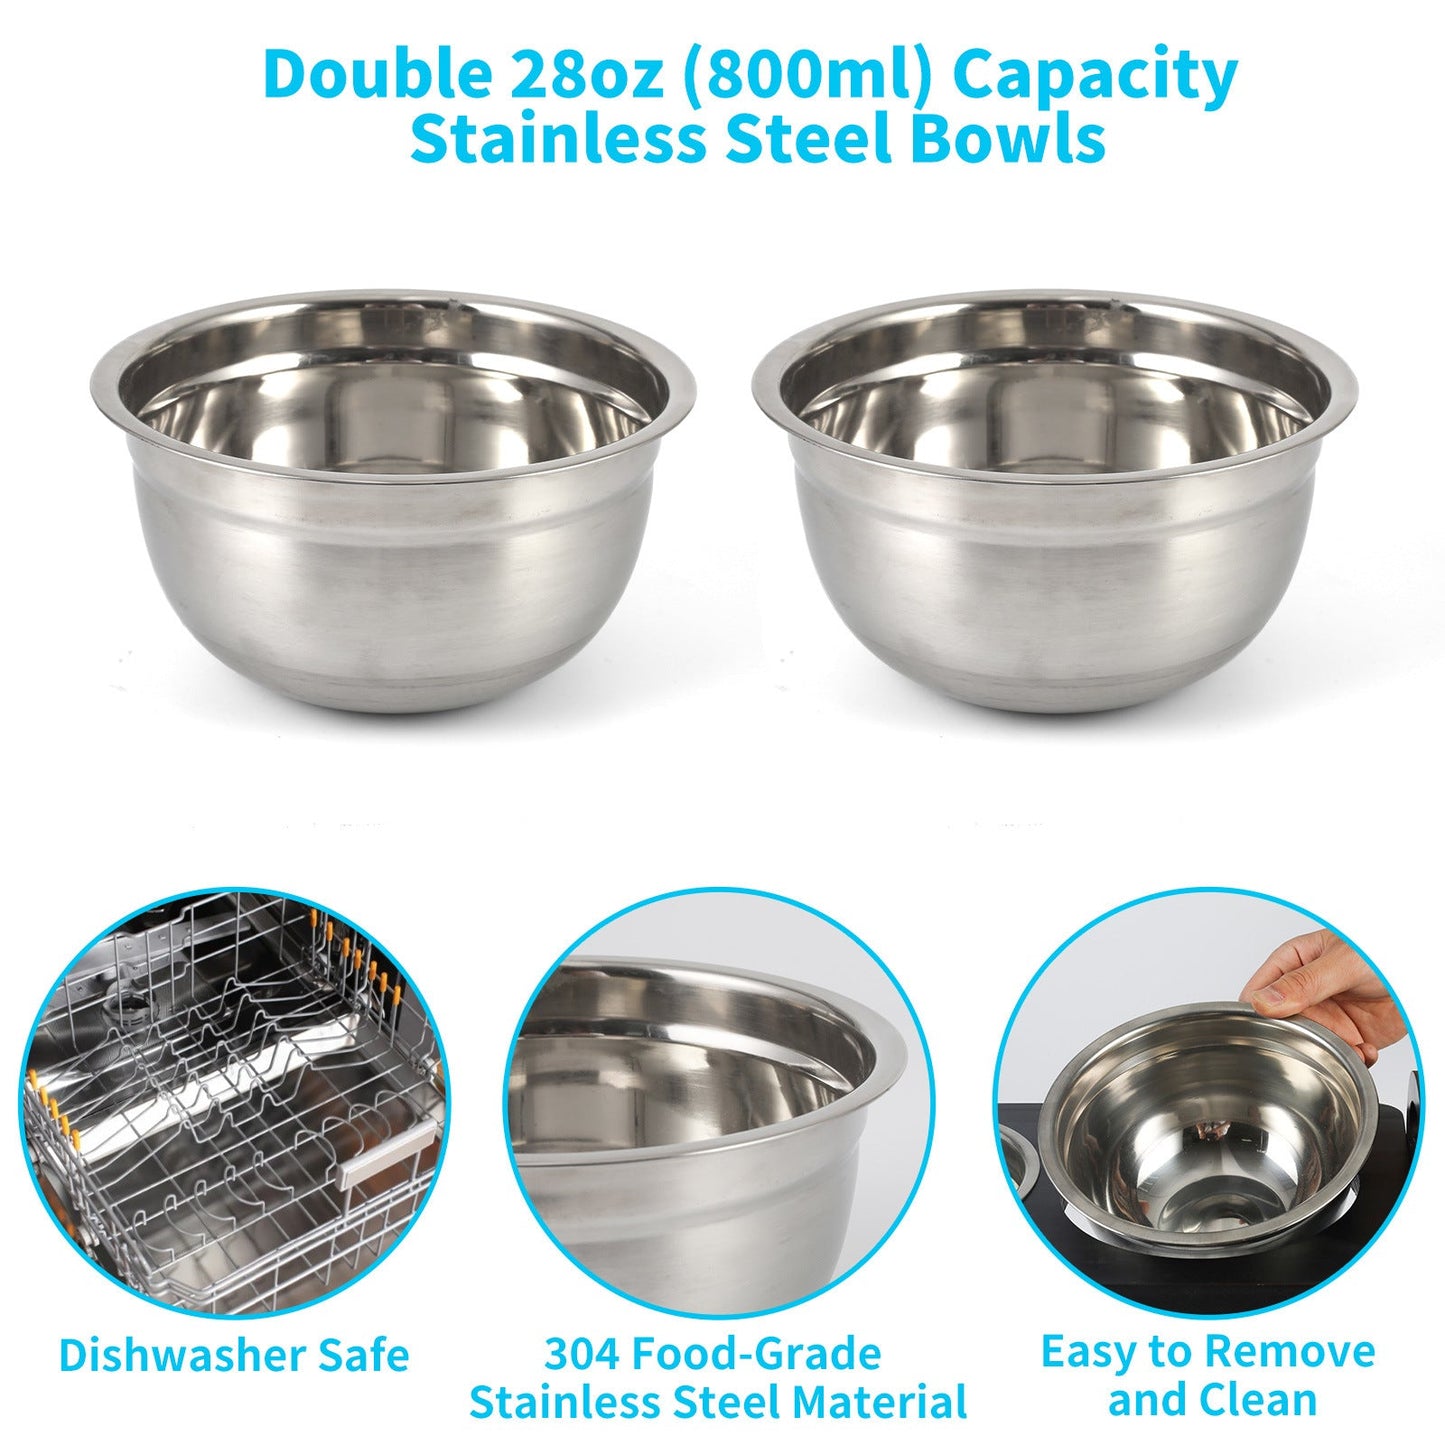 Elevated Dog Bowls for Medium Large Sized Dogs, Adjustable Heights